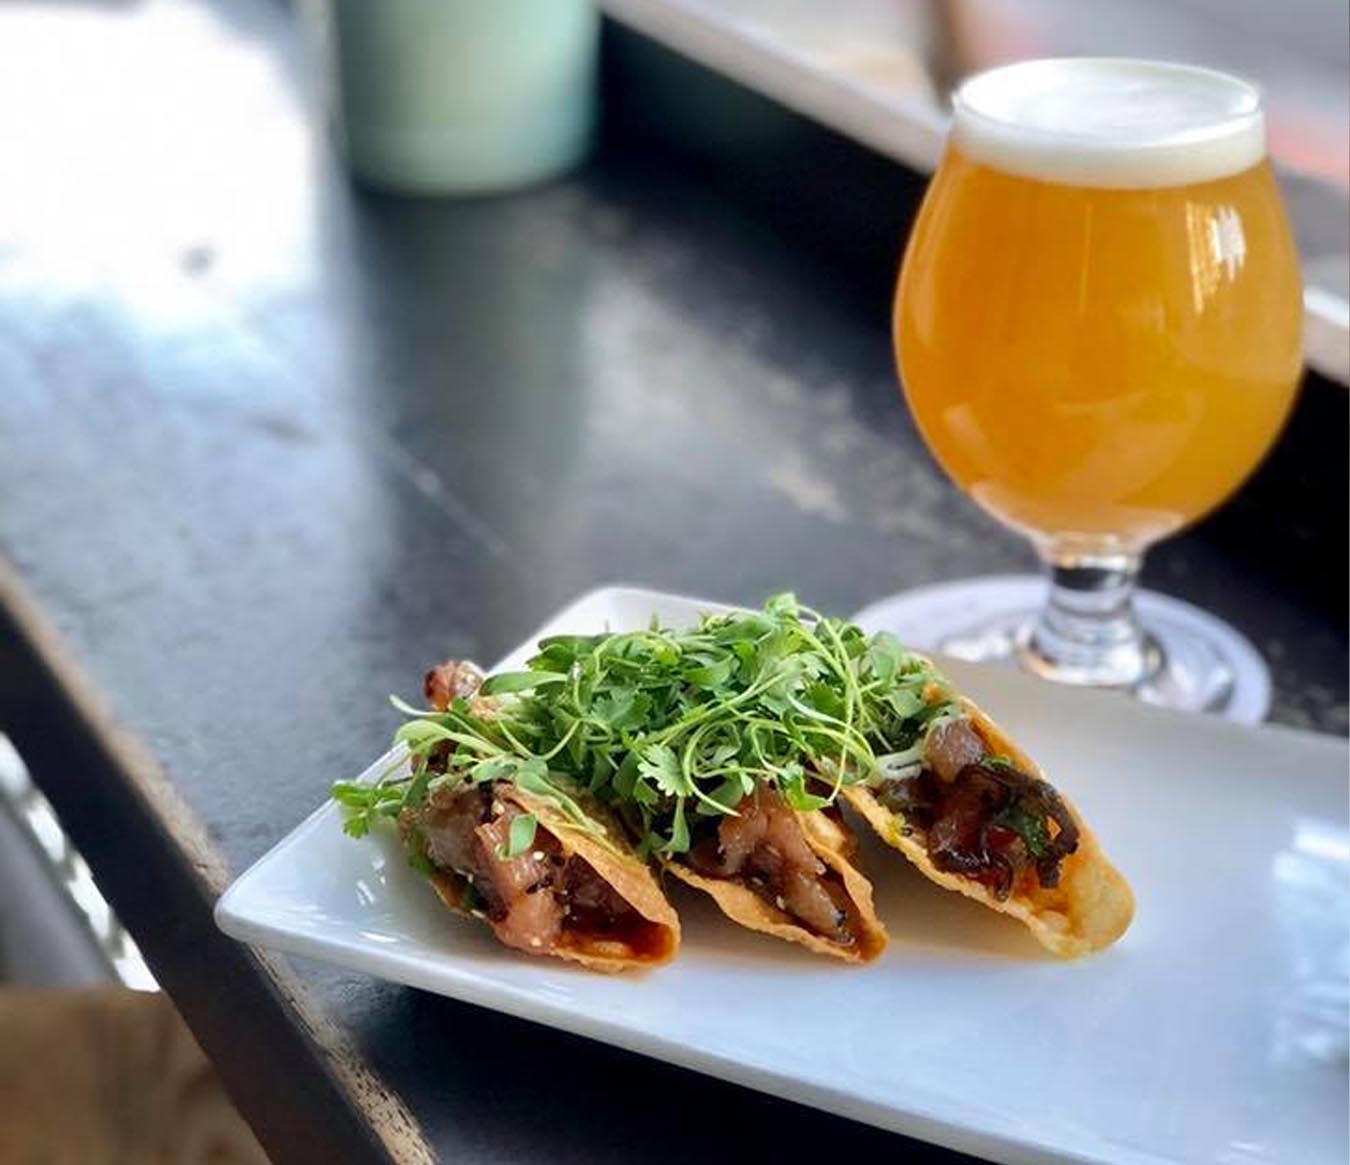 Where to Eat In San Diego - Half Door Brewing Company